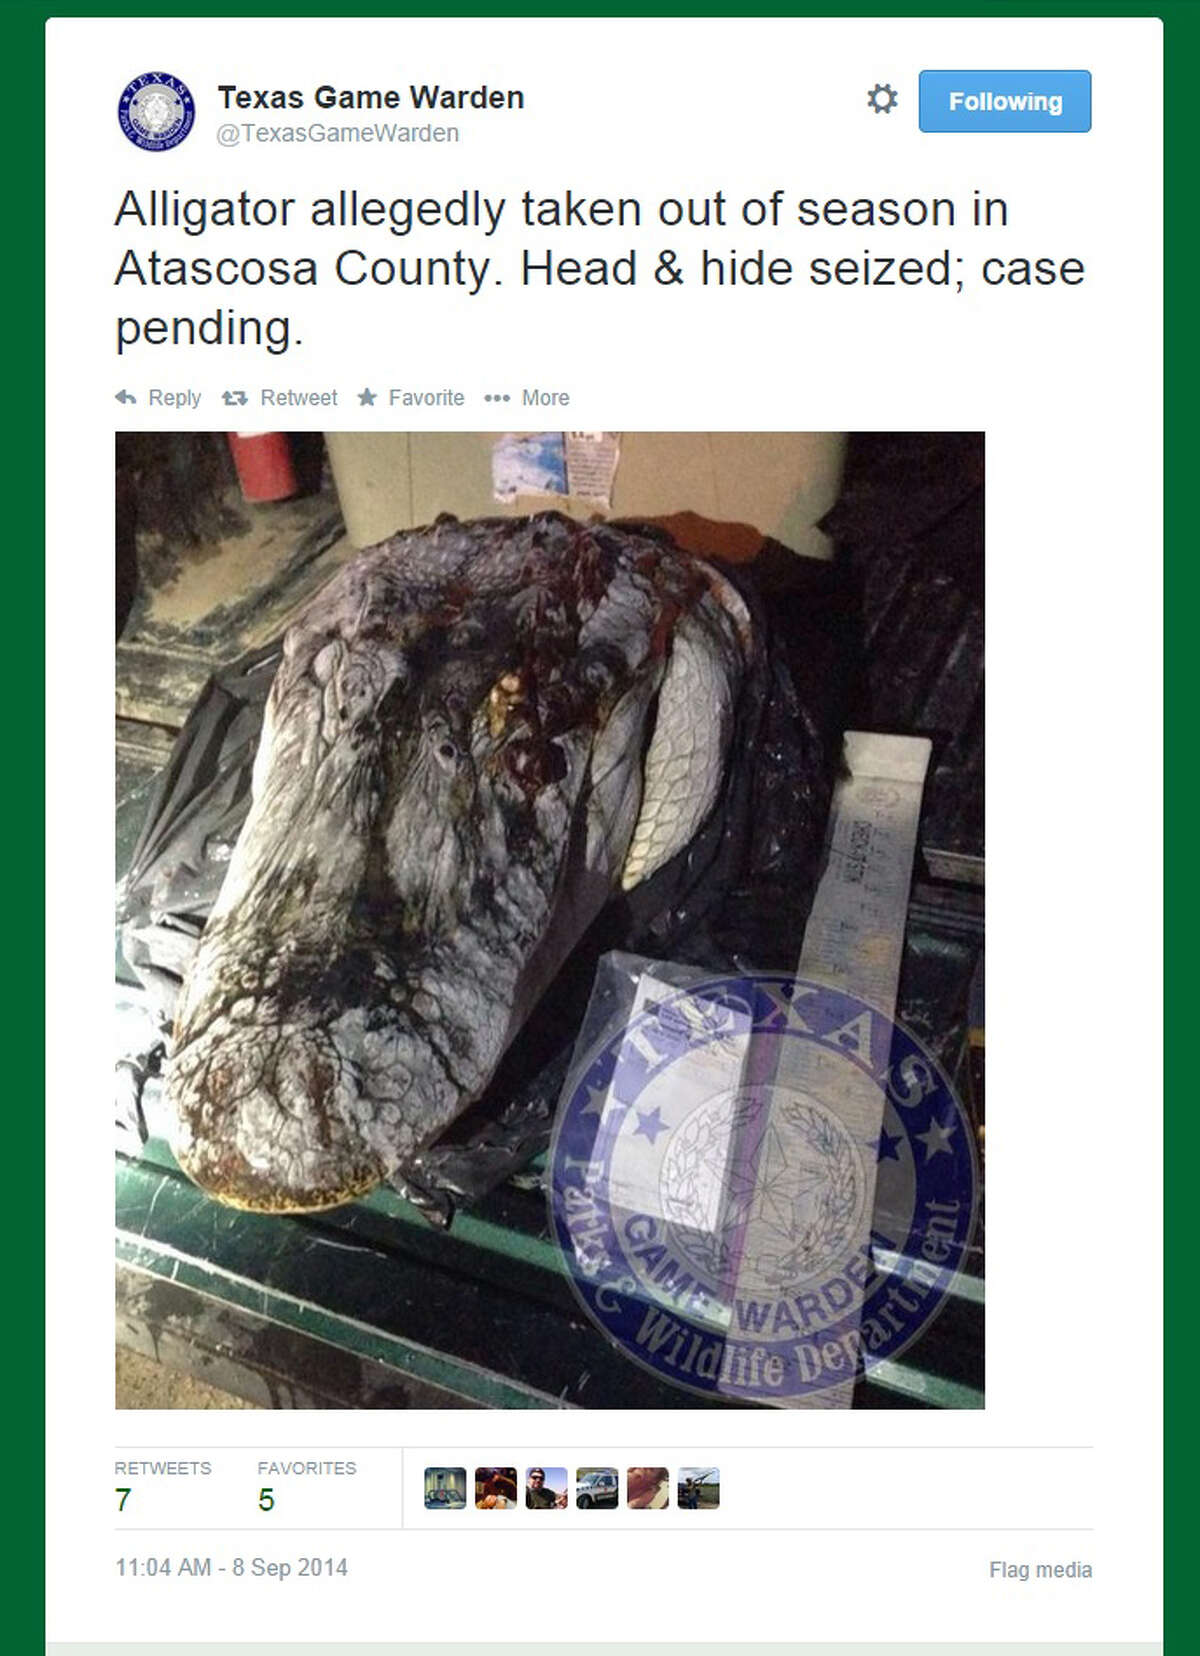 The Texas Game Warden Twitter account posted this photo of an alligator shot and killed in Atascosa County last week.